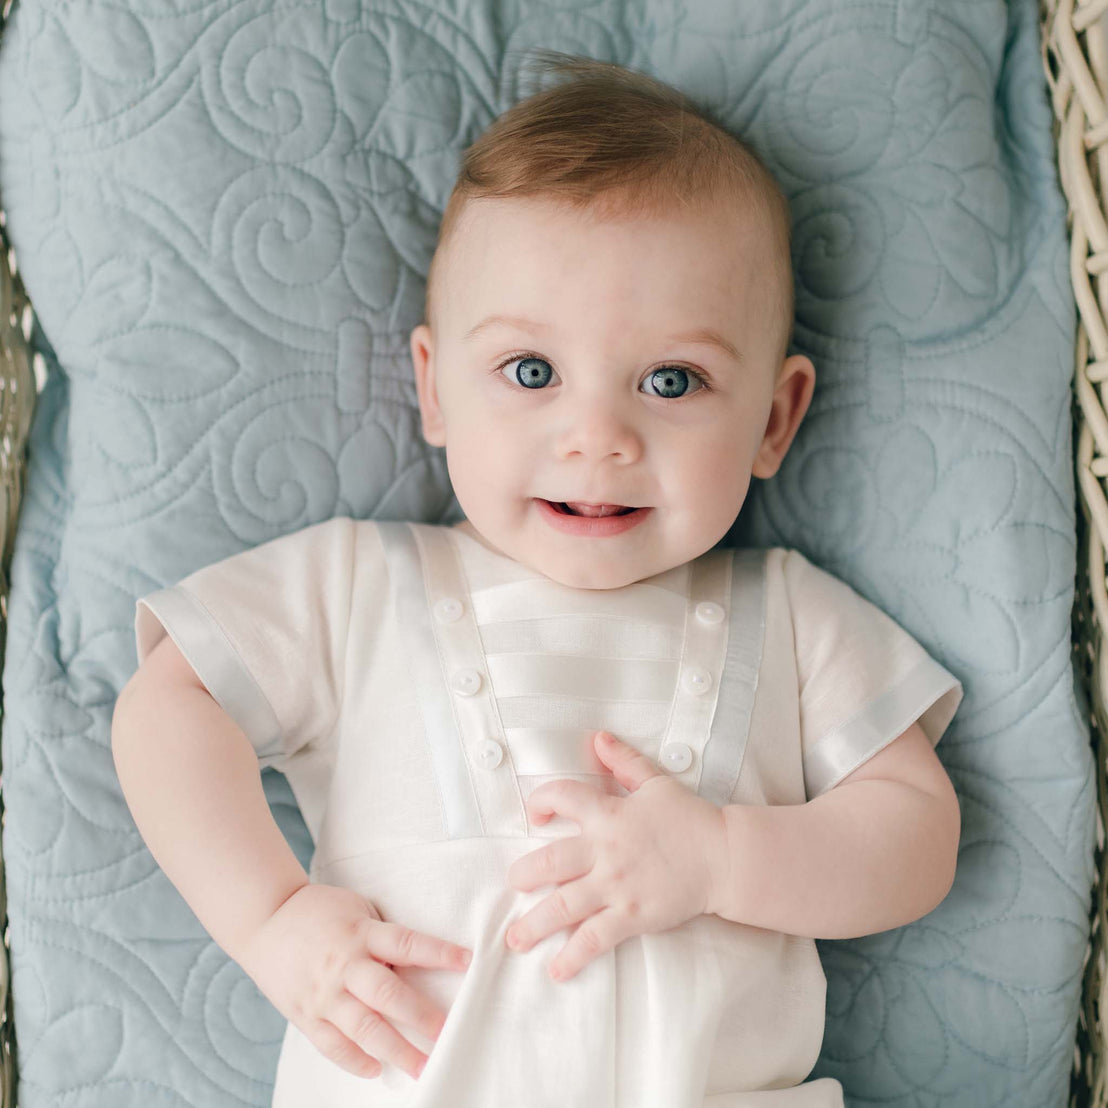 A baby with blue eyes and light brown hair is lying on a light blue quilted blanket. Clad in an Owen Linen Christening Romper, the baby looks up, smiling slightly, with one hand resting on the chest and the other on the blanket—perfect for his Christening day outfit.